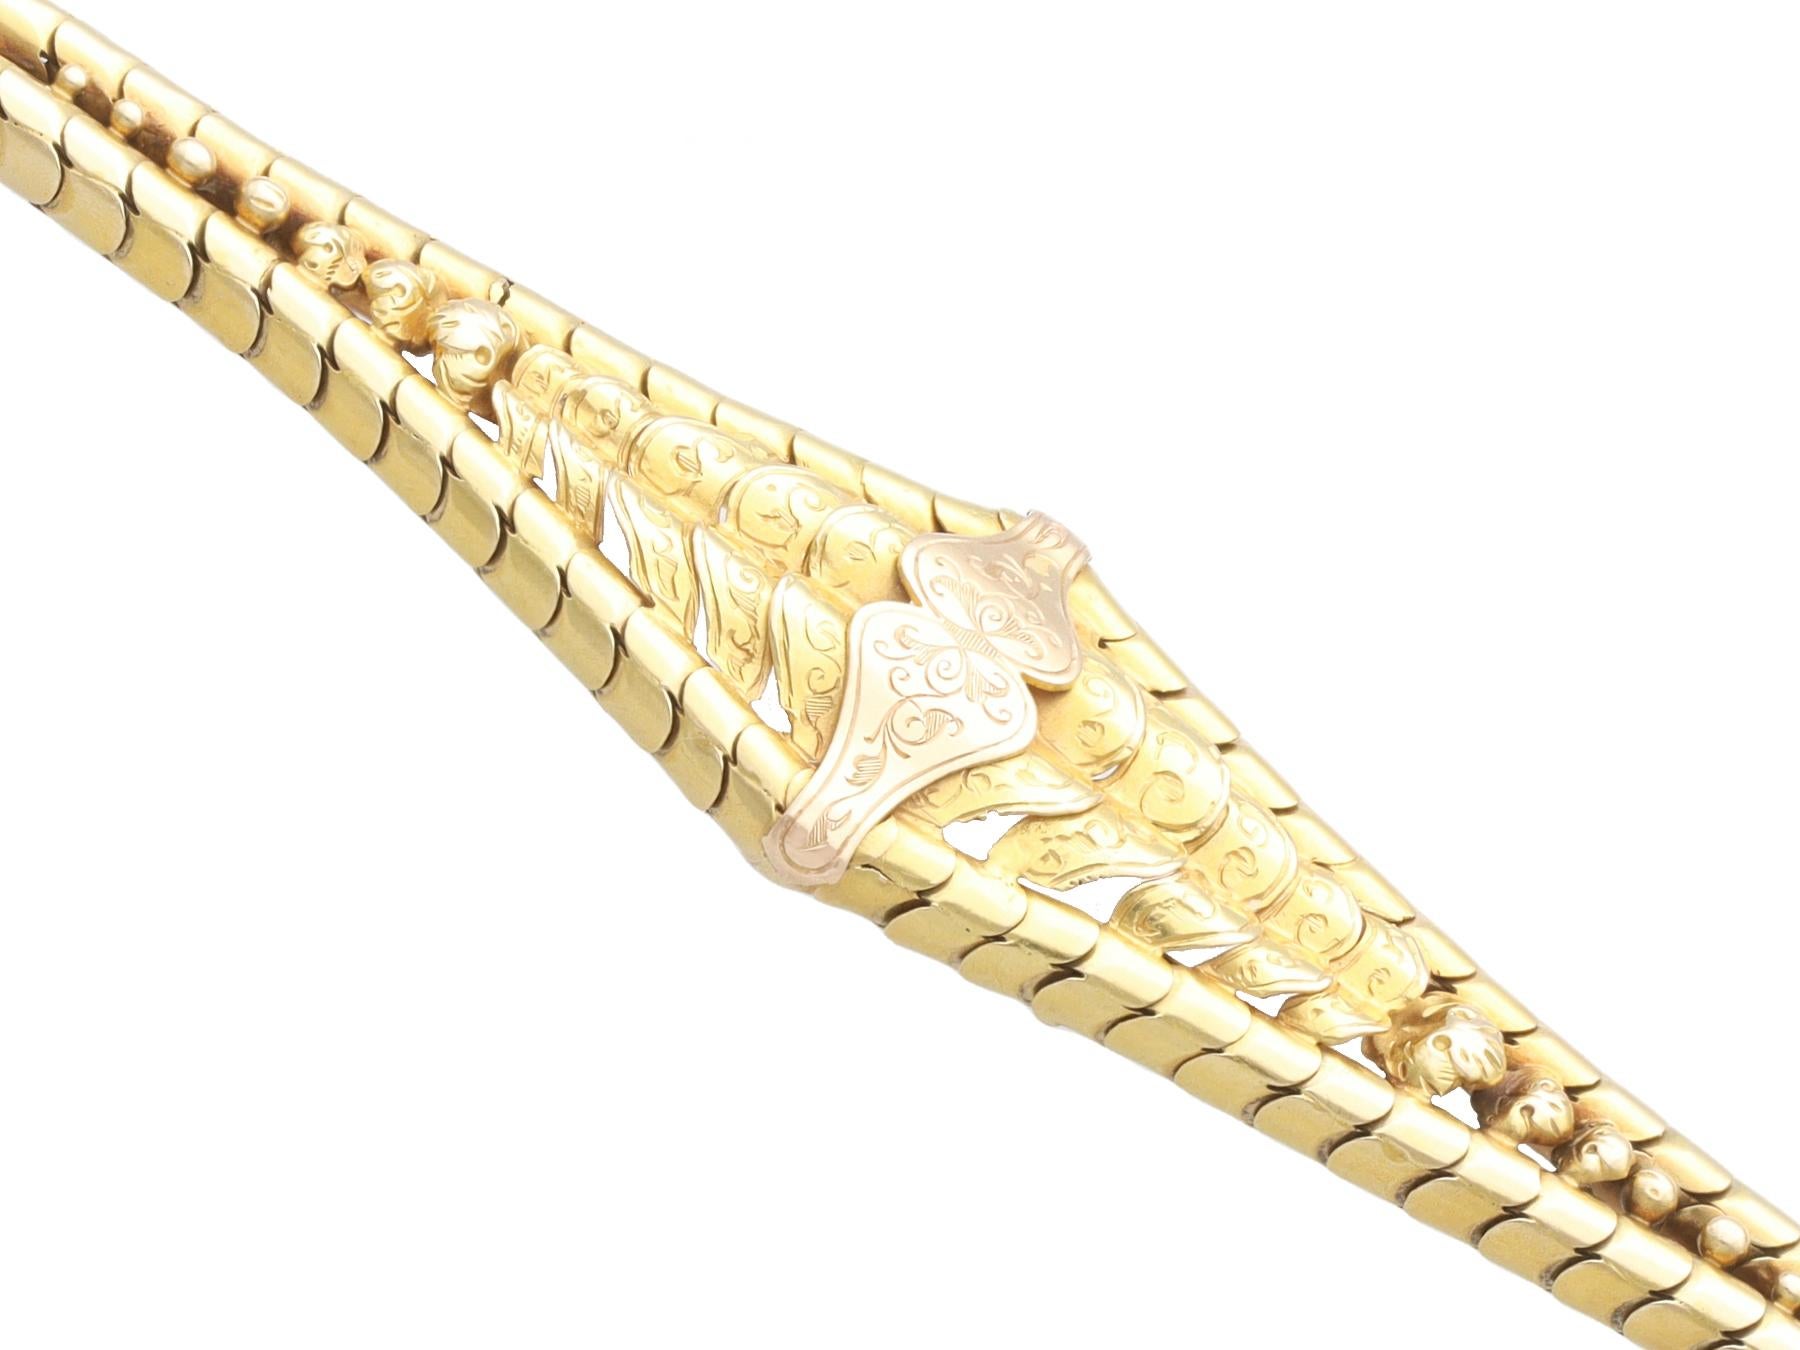 Antique 18k Yellow Gold Bracelet by Hunt & Rosell For Sale 2